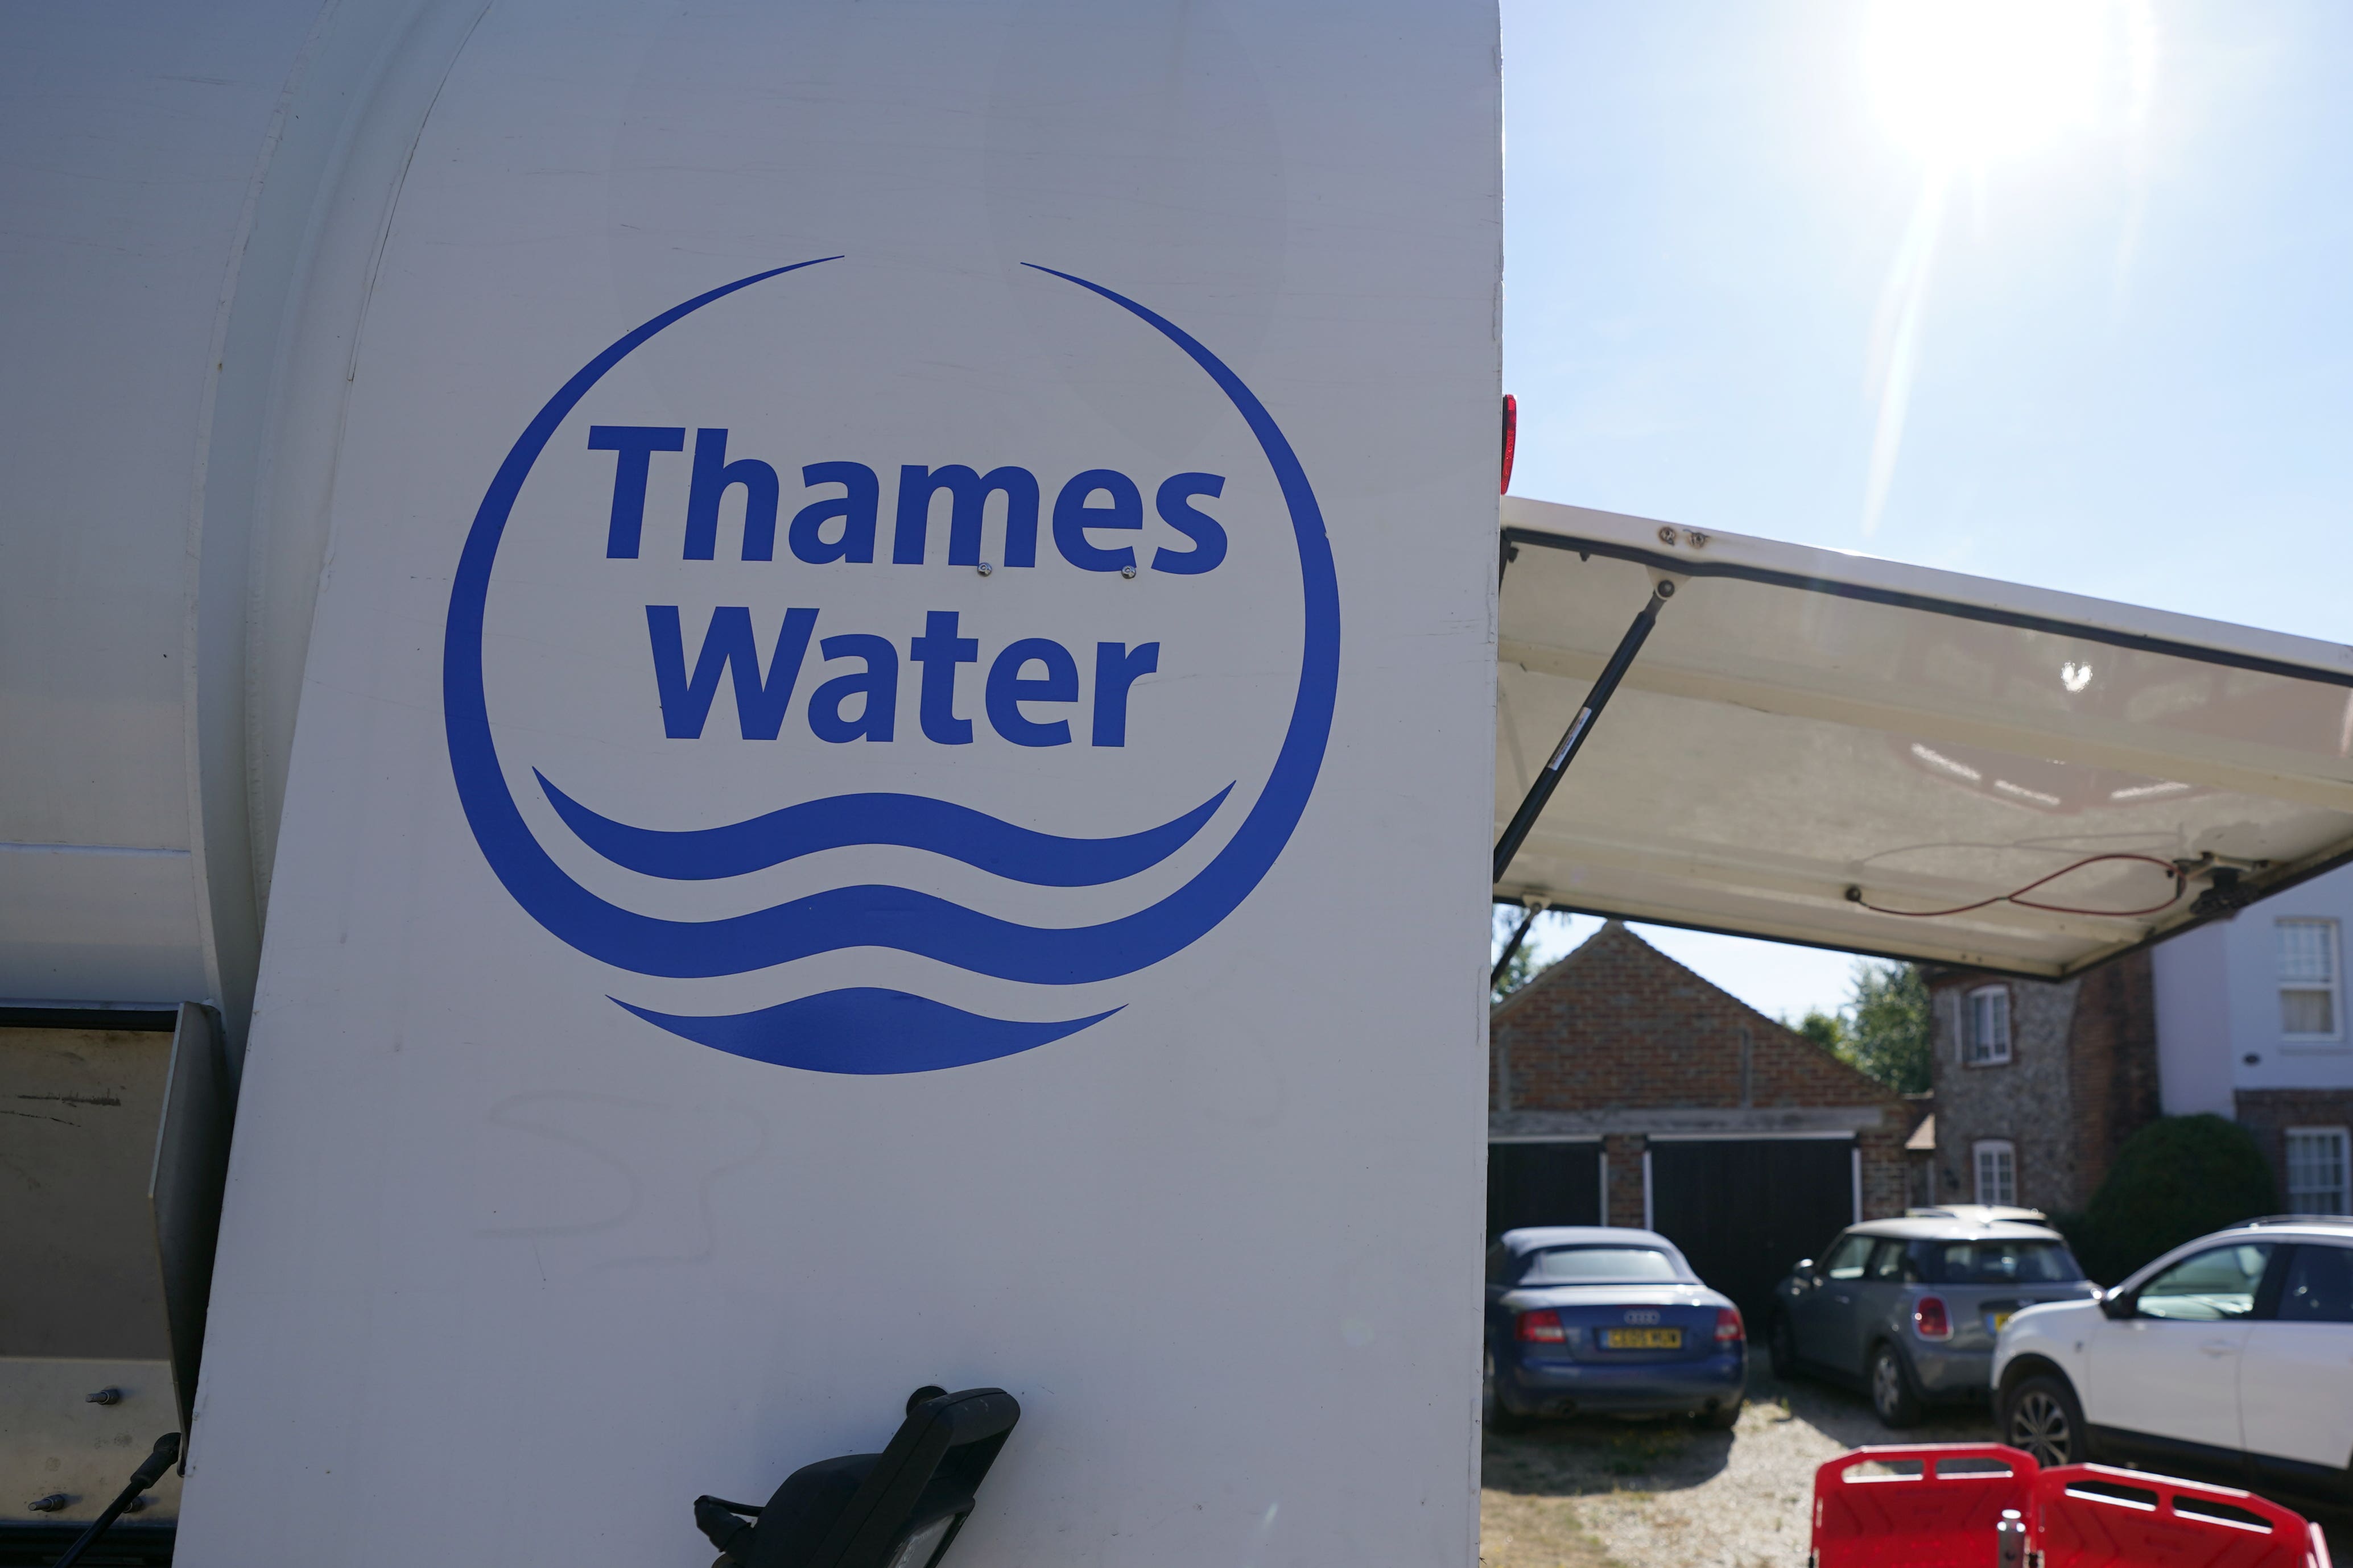 Thames Water warned residents of up to 616 homes in Bramley, Surrey, to avoid using tap water